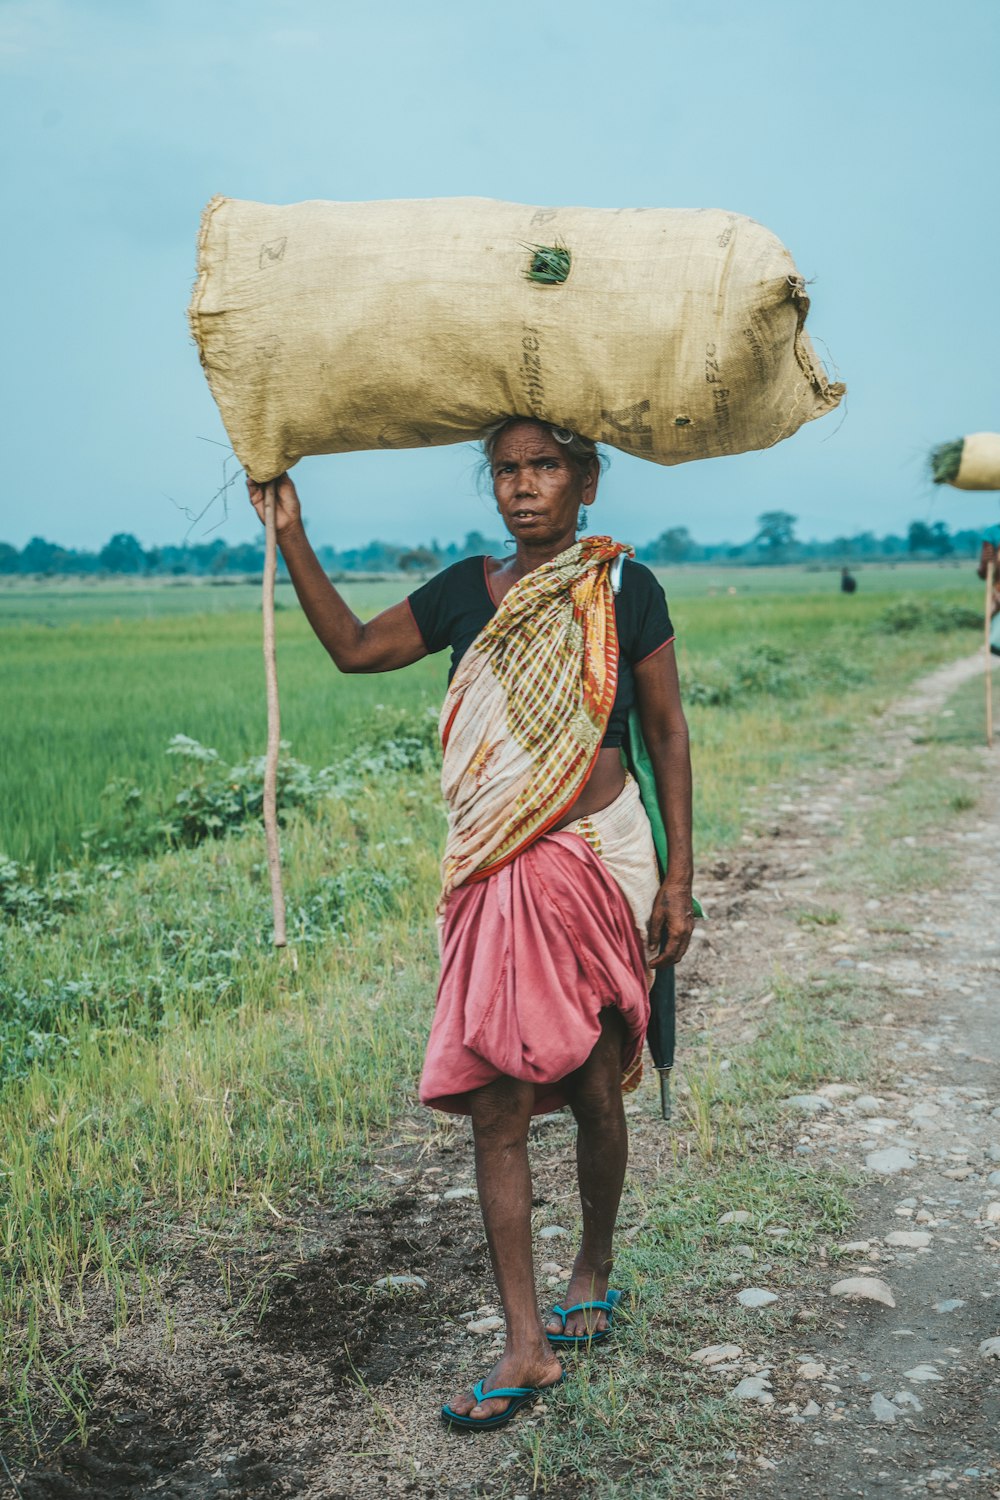 a woman carrying a large bag on her head